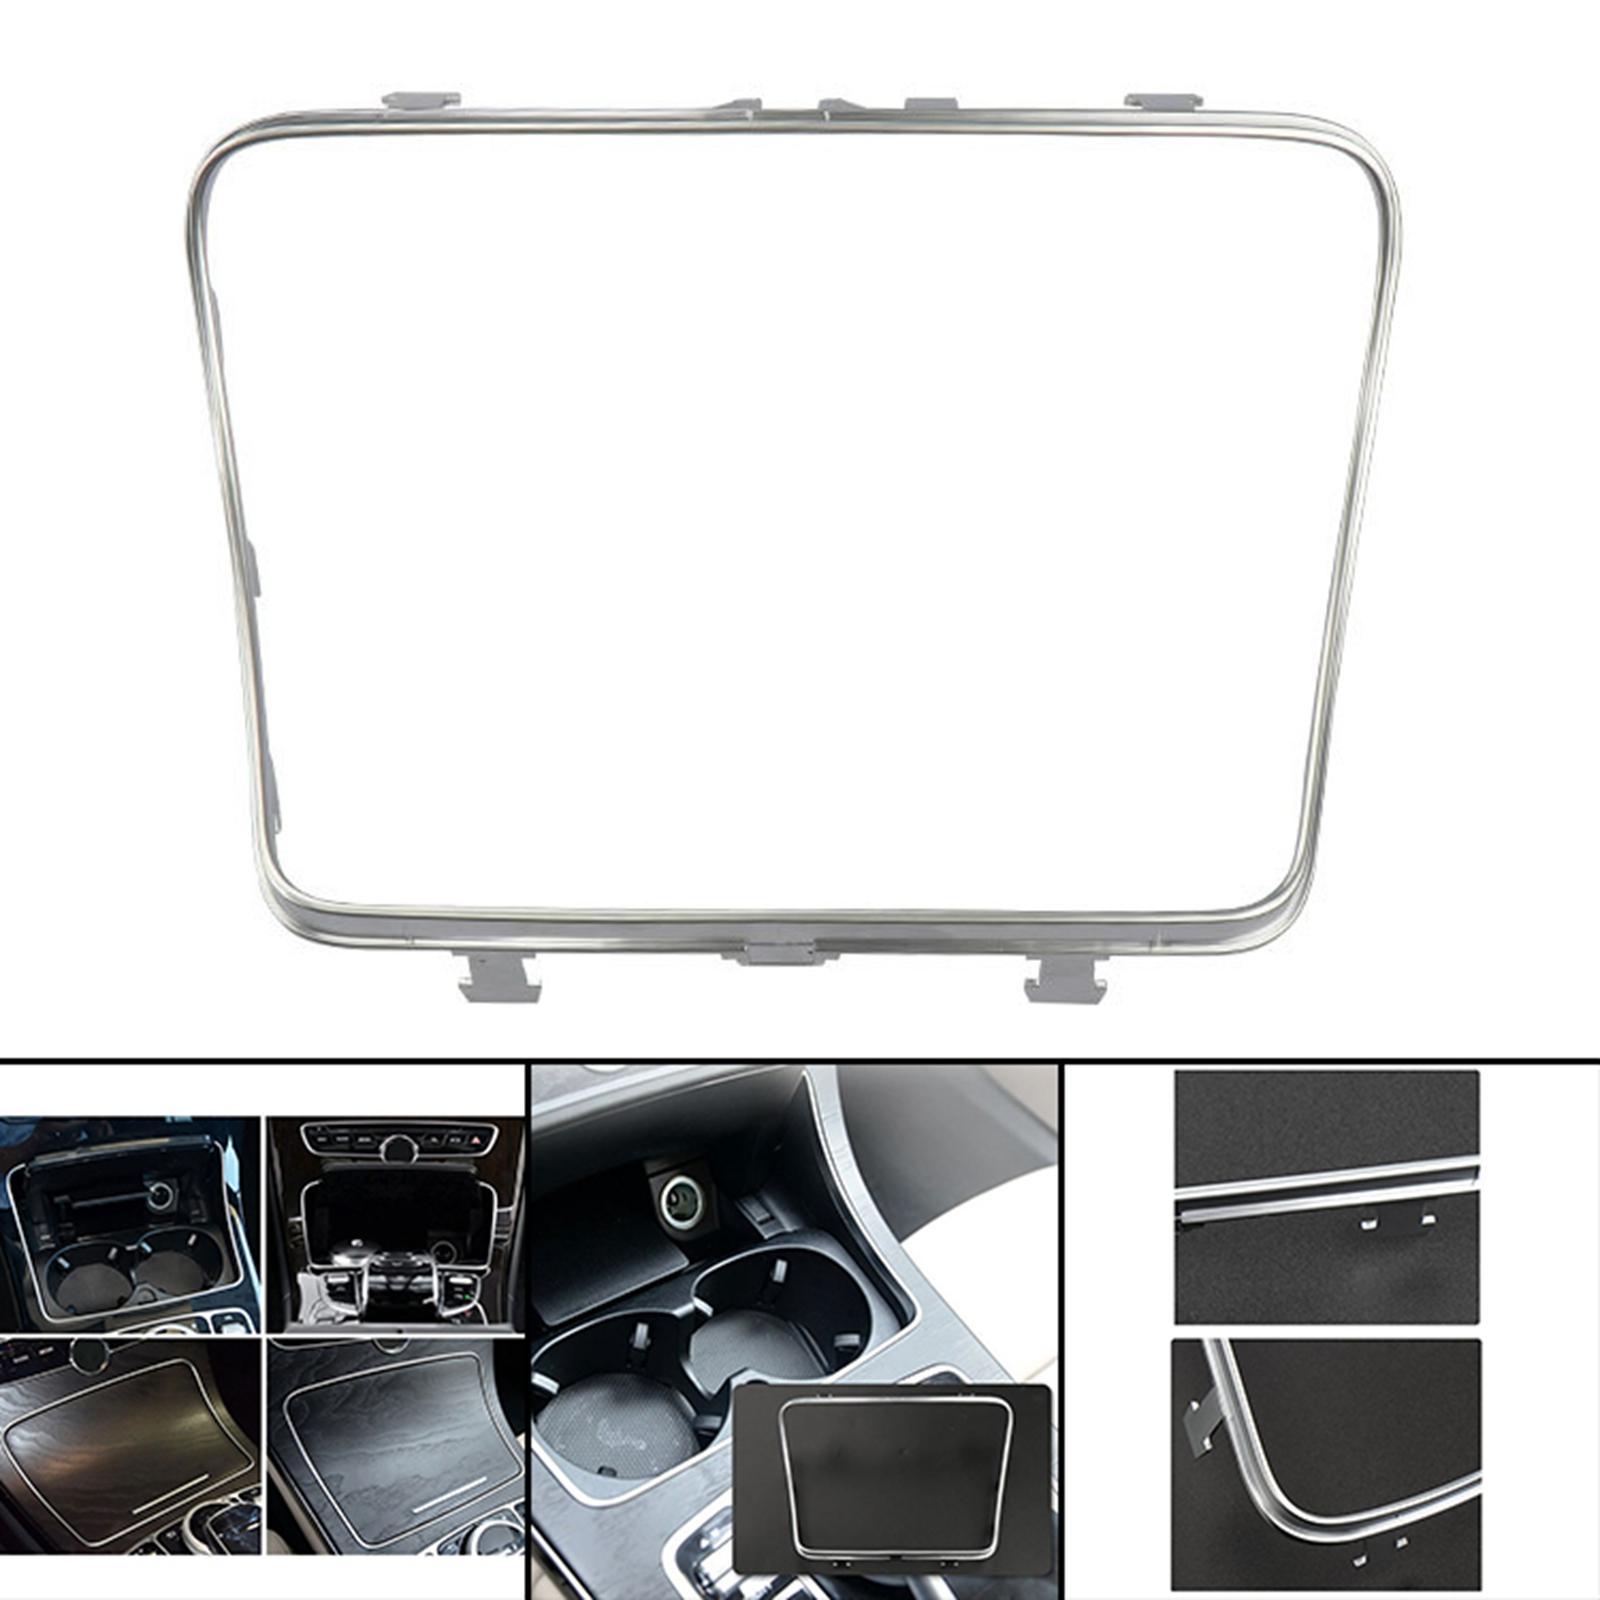 Console Cup Holder Strip Trim Frame Ashtray Trim Ring Stickers Fits for Mercedes C Class W205 GLC Class W205 2015-20 Moulding Trim Plating